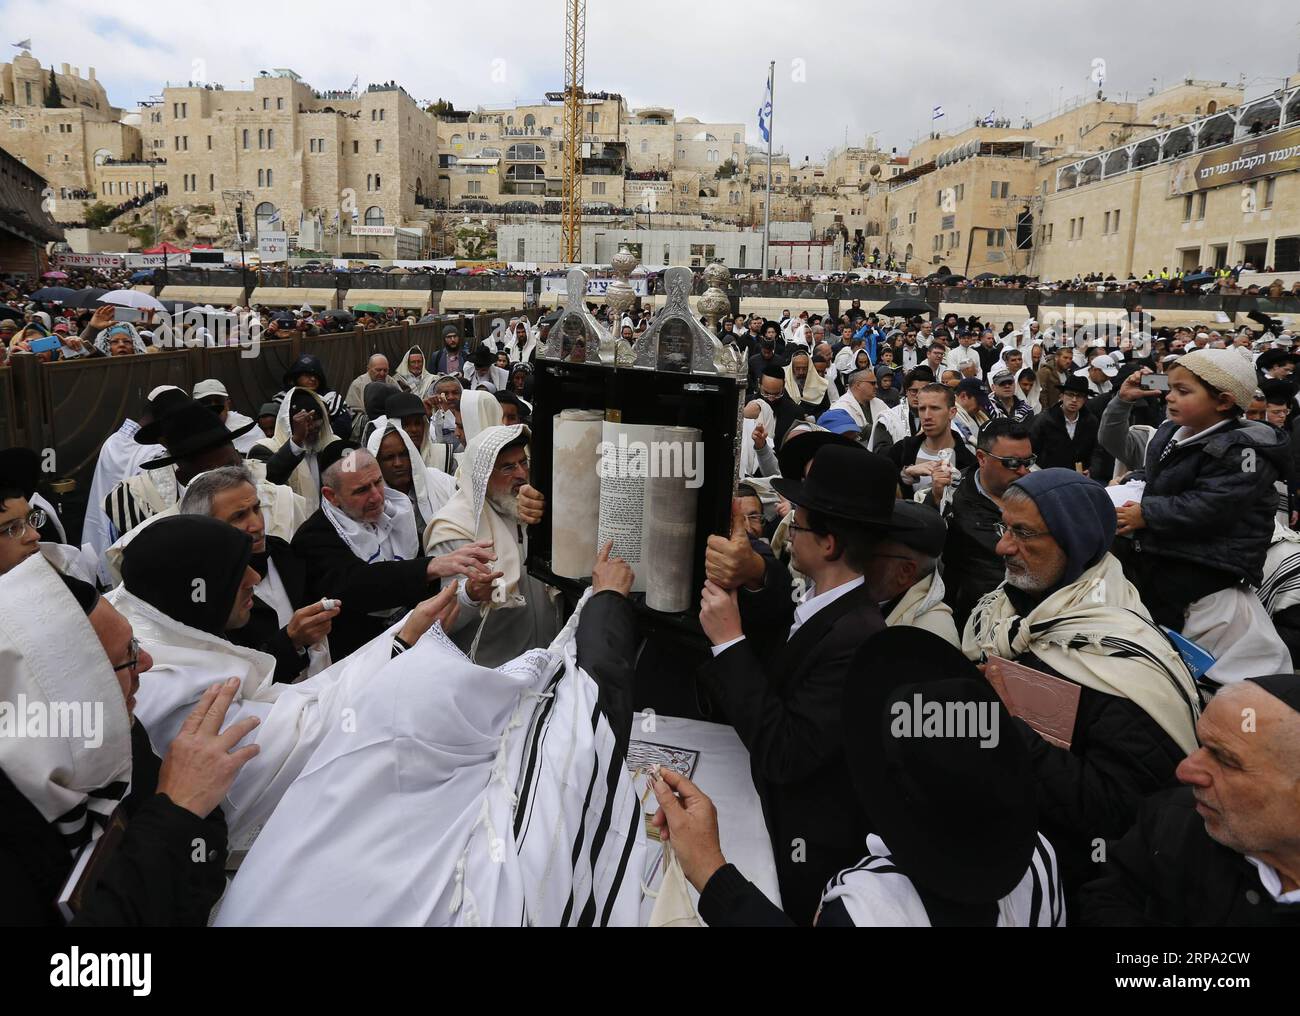 (190423) -- BEIJING, April 23, 2019 -- Jews participate in the priestly blessing during the Passover holiday at the Western Wall in the Old City of Jerusalem on April 22, 2019. Thousands of Jews make the pilgrimage to Jerusalem during the eight-day Passover holiday, which commemorates the Israelites exodus from slavery in Egypt some 3,500 years ago. ) XINHUA PHOTOS OF THE DAY MuammarxAwad PUBLICATIONxNOTxINxCHN Stock Photo